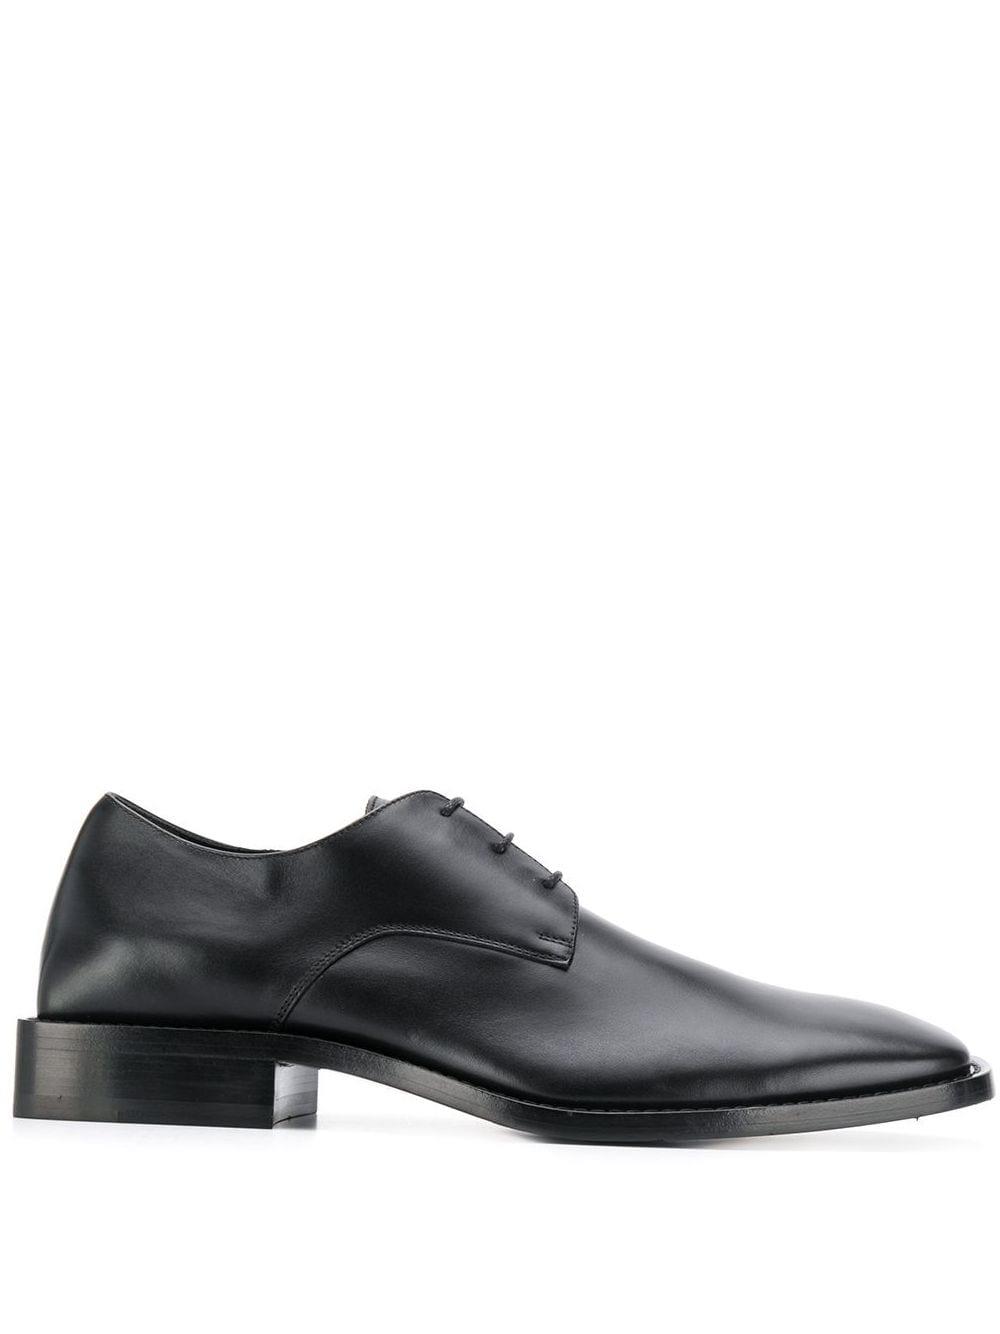 Balenciaga Leather Square Toe Derby Shoes in Black for Men | Lyst